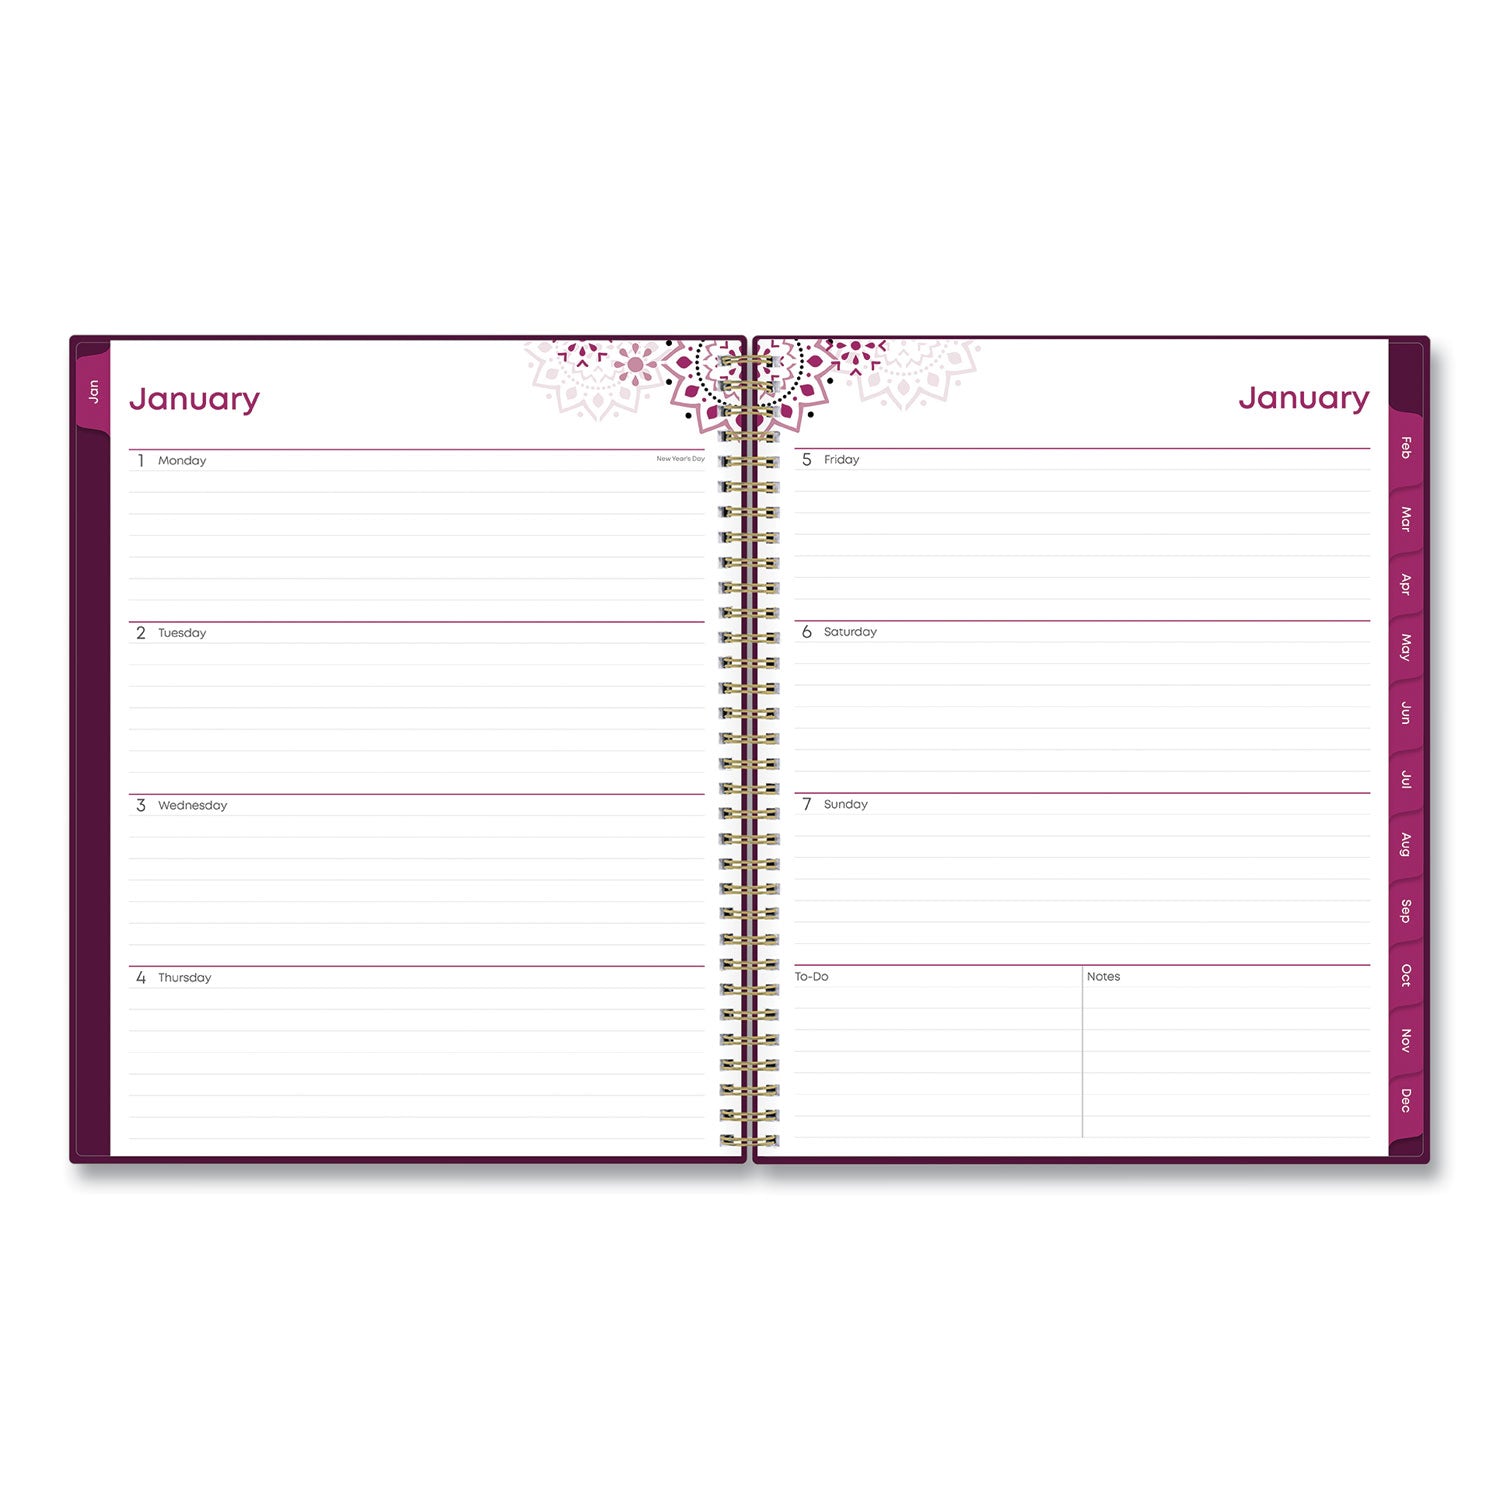 gili-weekly-monthly-planner-gili-jewel-tone-artwork-11-x-85-plum-cover-12-month-jan-to-dec-2024_bls117889 - 2